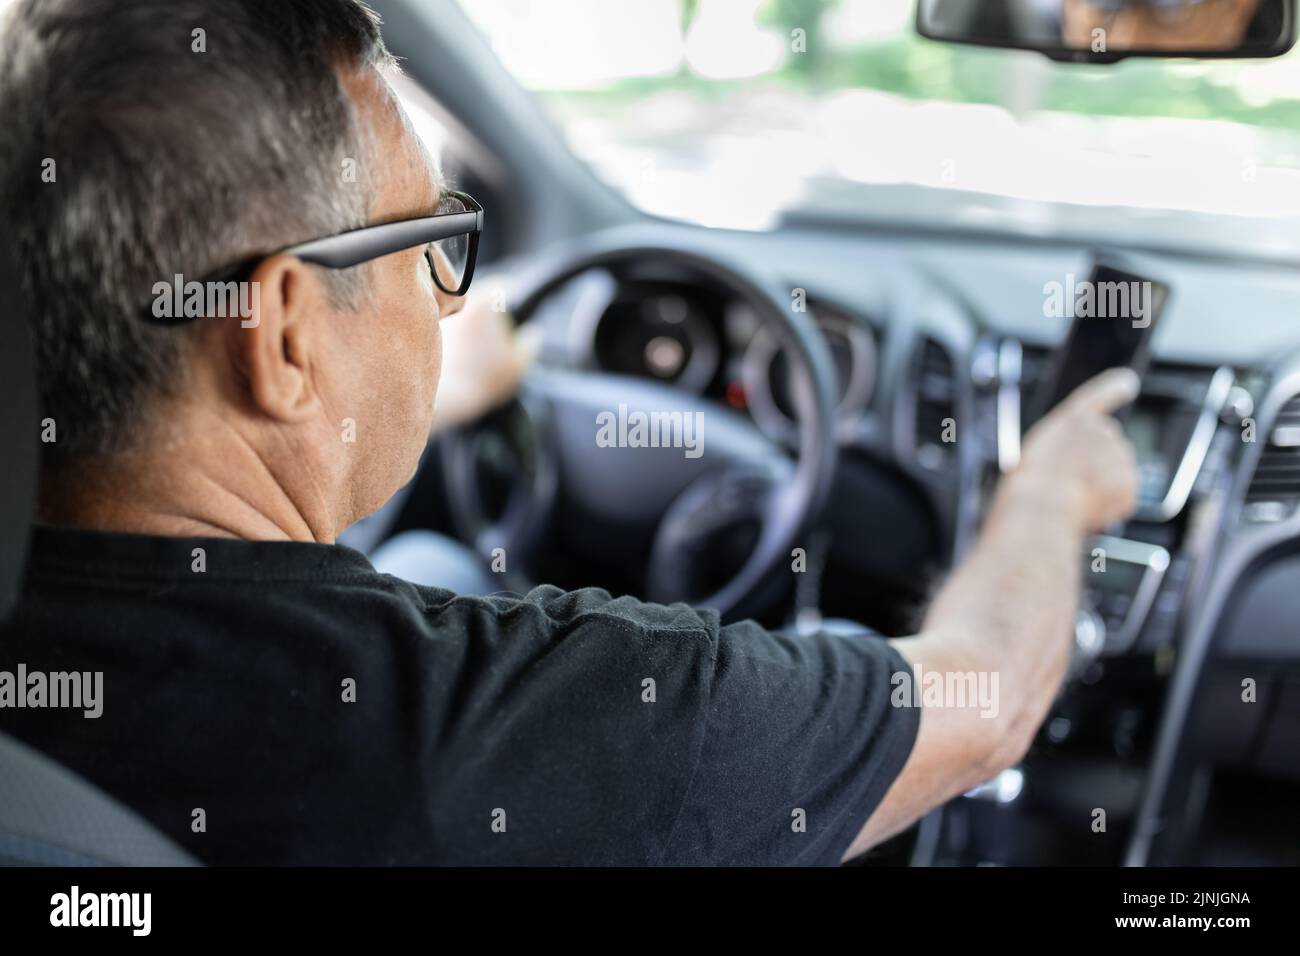 Senior behind the steering wheel using navigation and looking for directions Stock Photo